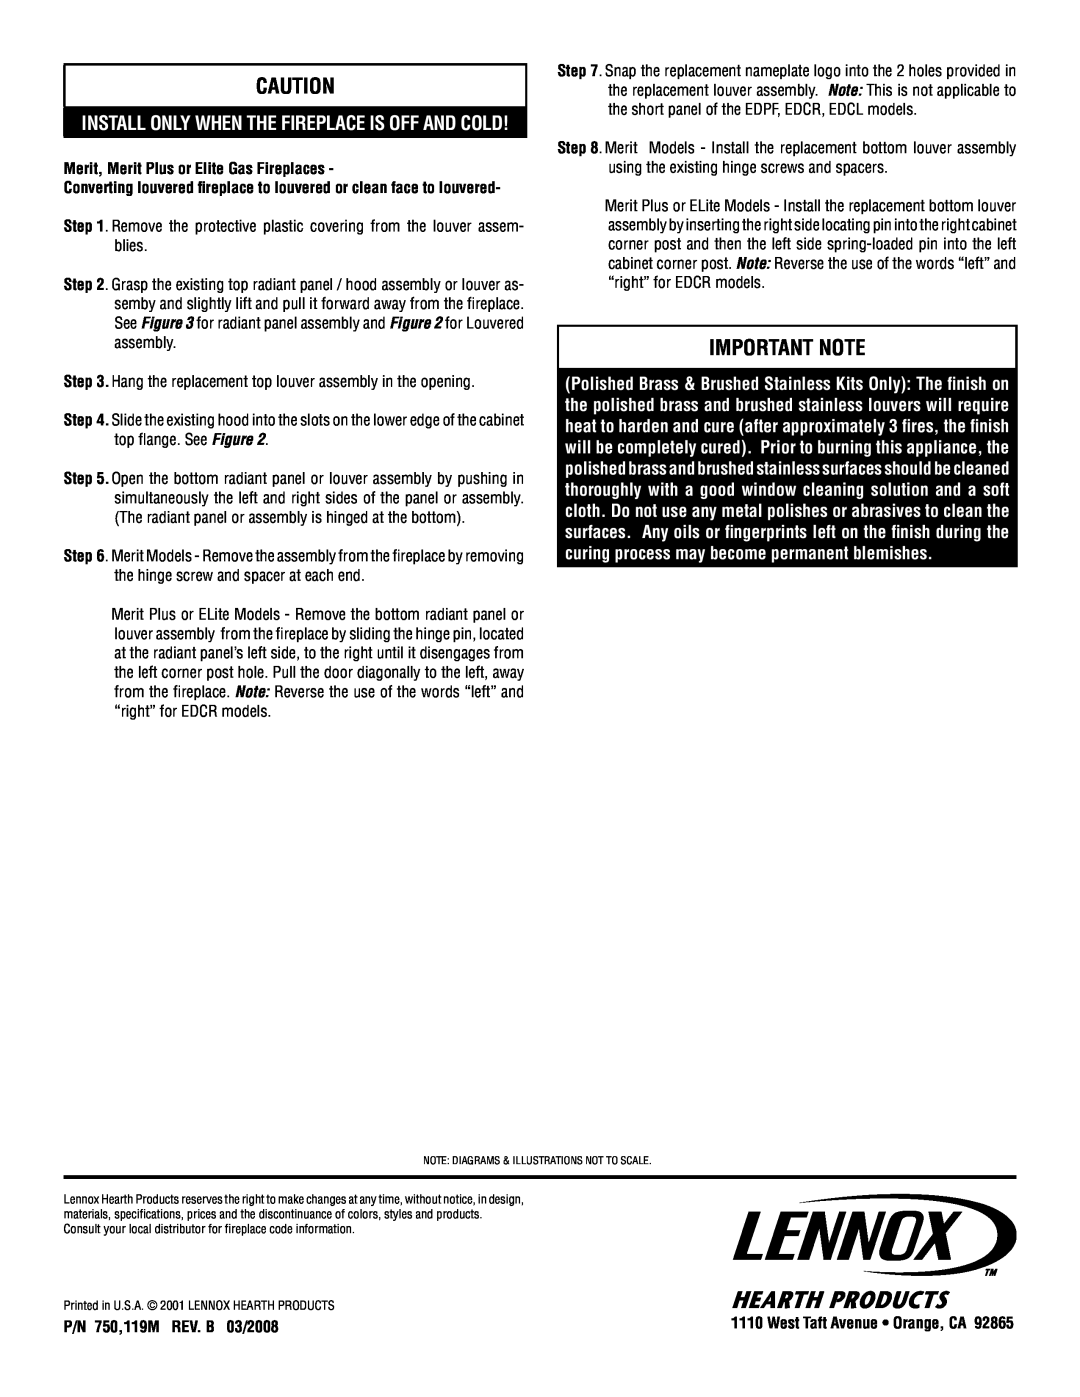 Lennox Hearth 3-Piece Louver Kit installation instructions Important Note, Install Only When The Fireplace Is Off And Cold 